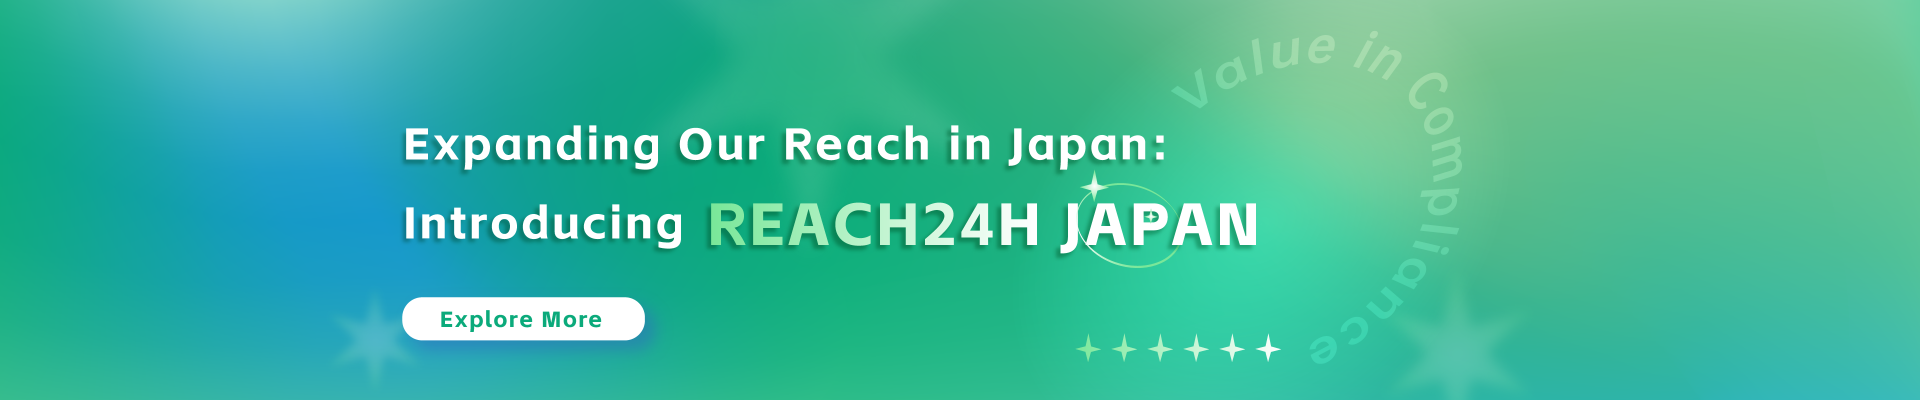 REACH24H Strengthens Its Presence in Japan with New Subsidiary, Meeting Clients' Evolving Needs